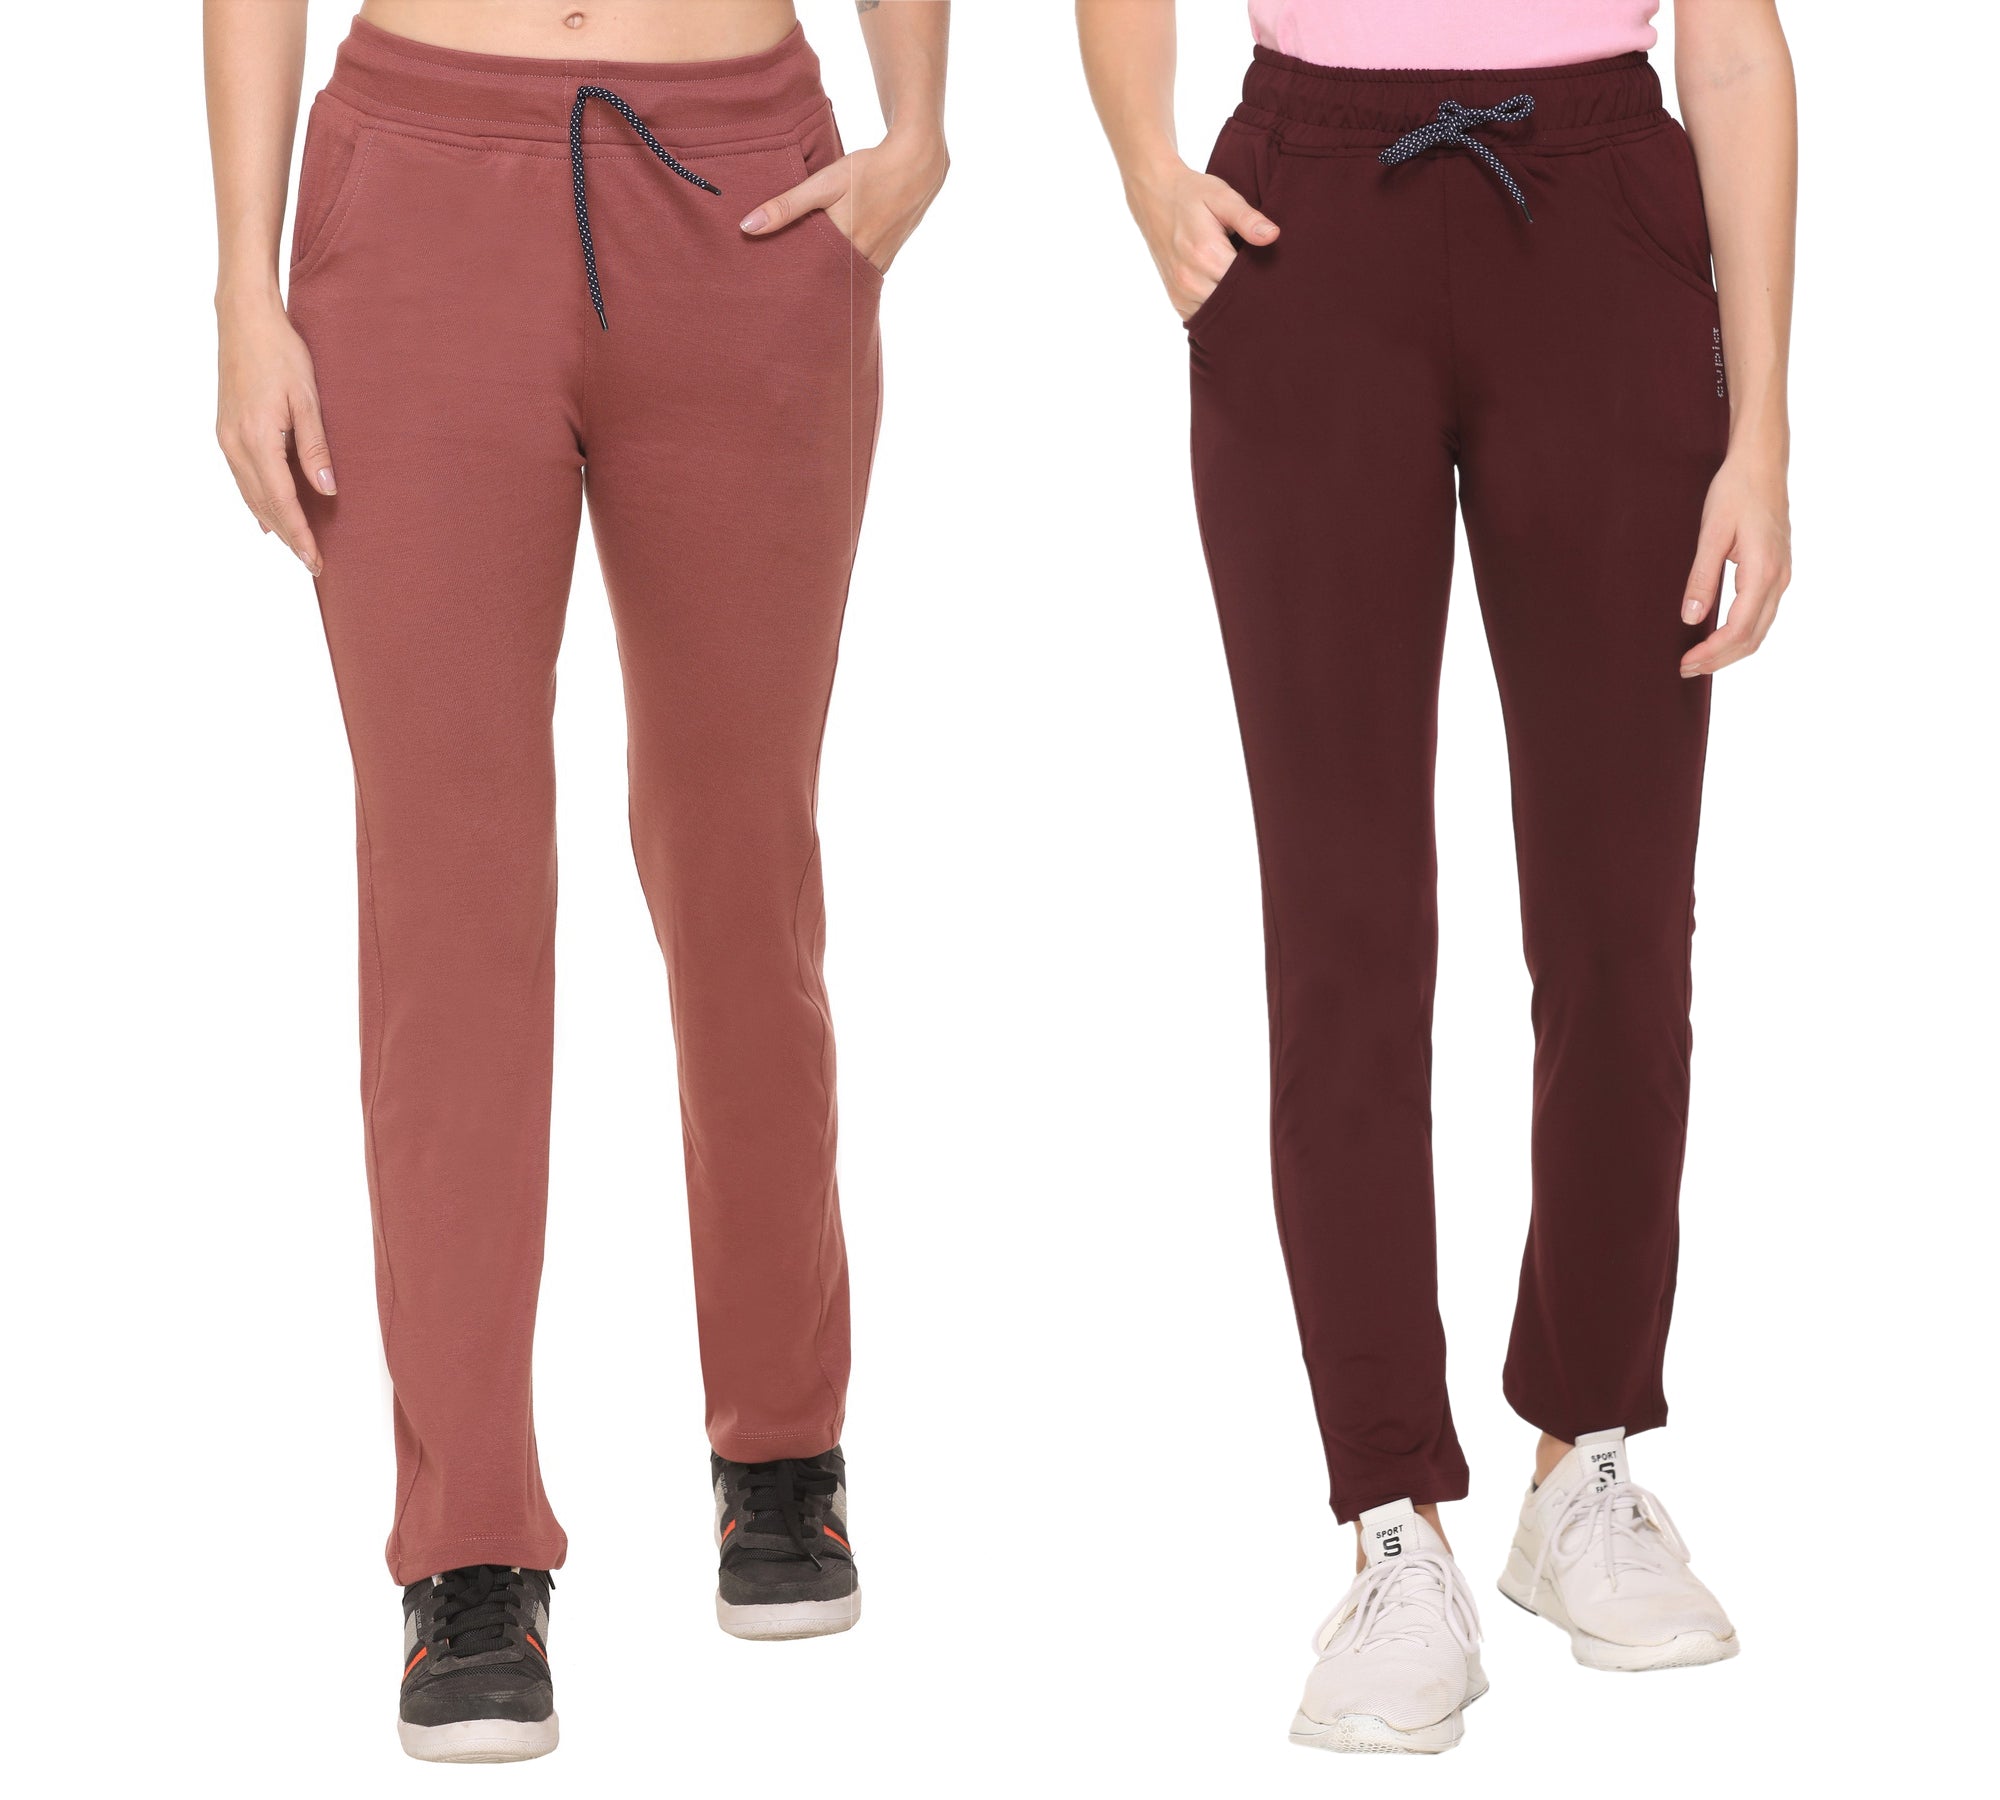 Trousers/trackpant For Women Combo Pack Of 2 at Rs 1092.00 | Track Pant |  ID: 25980793388